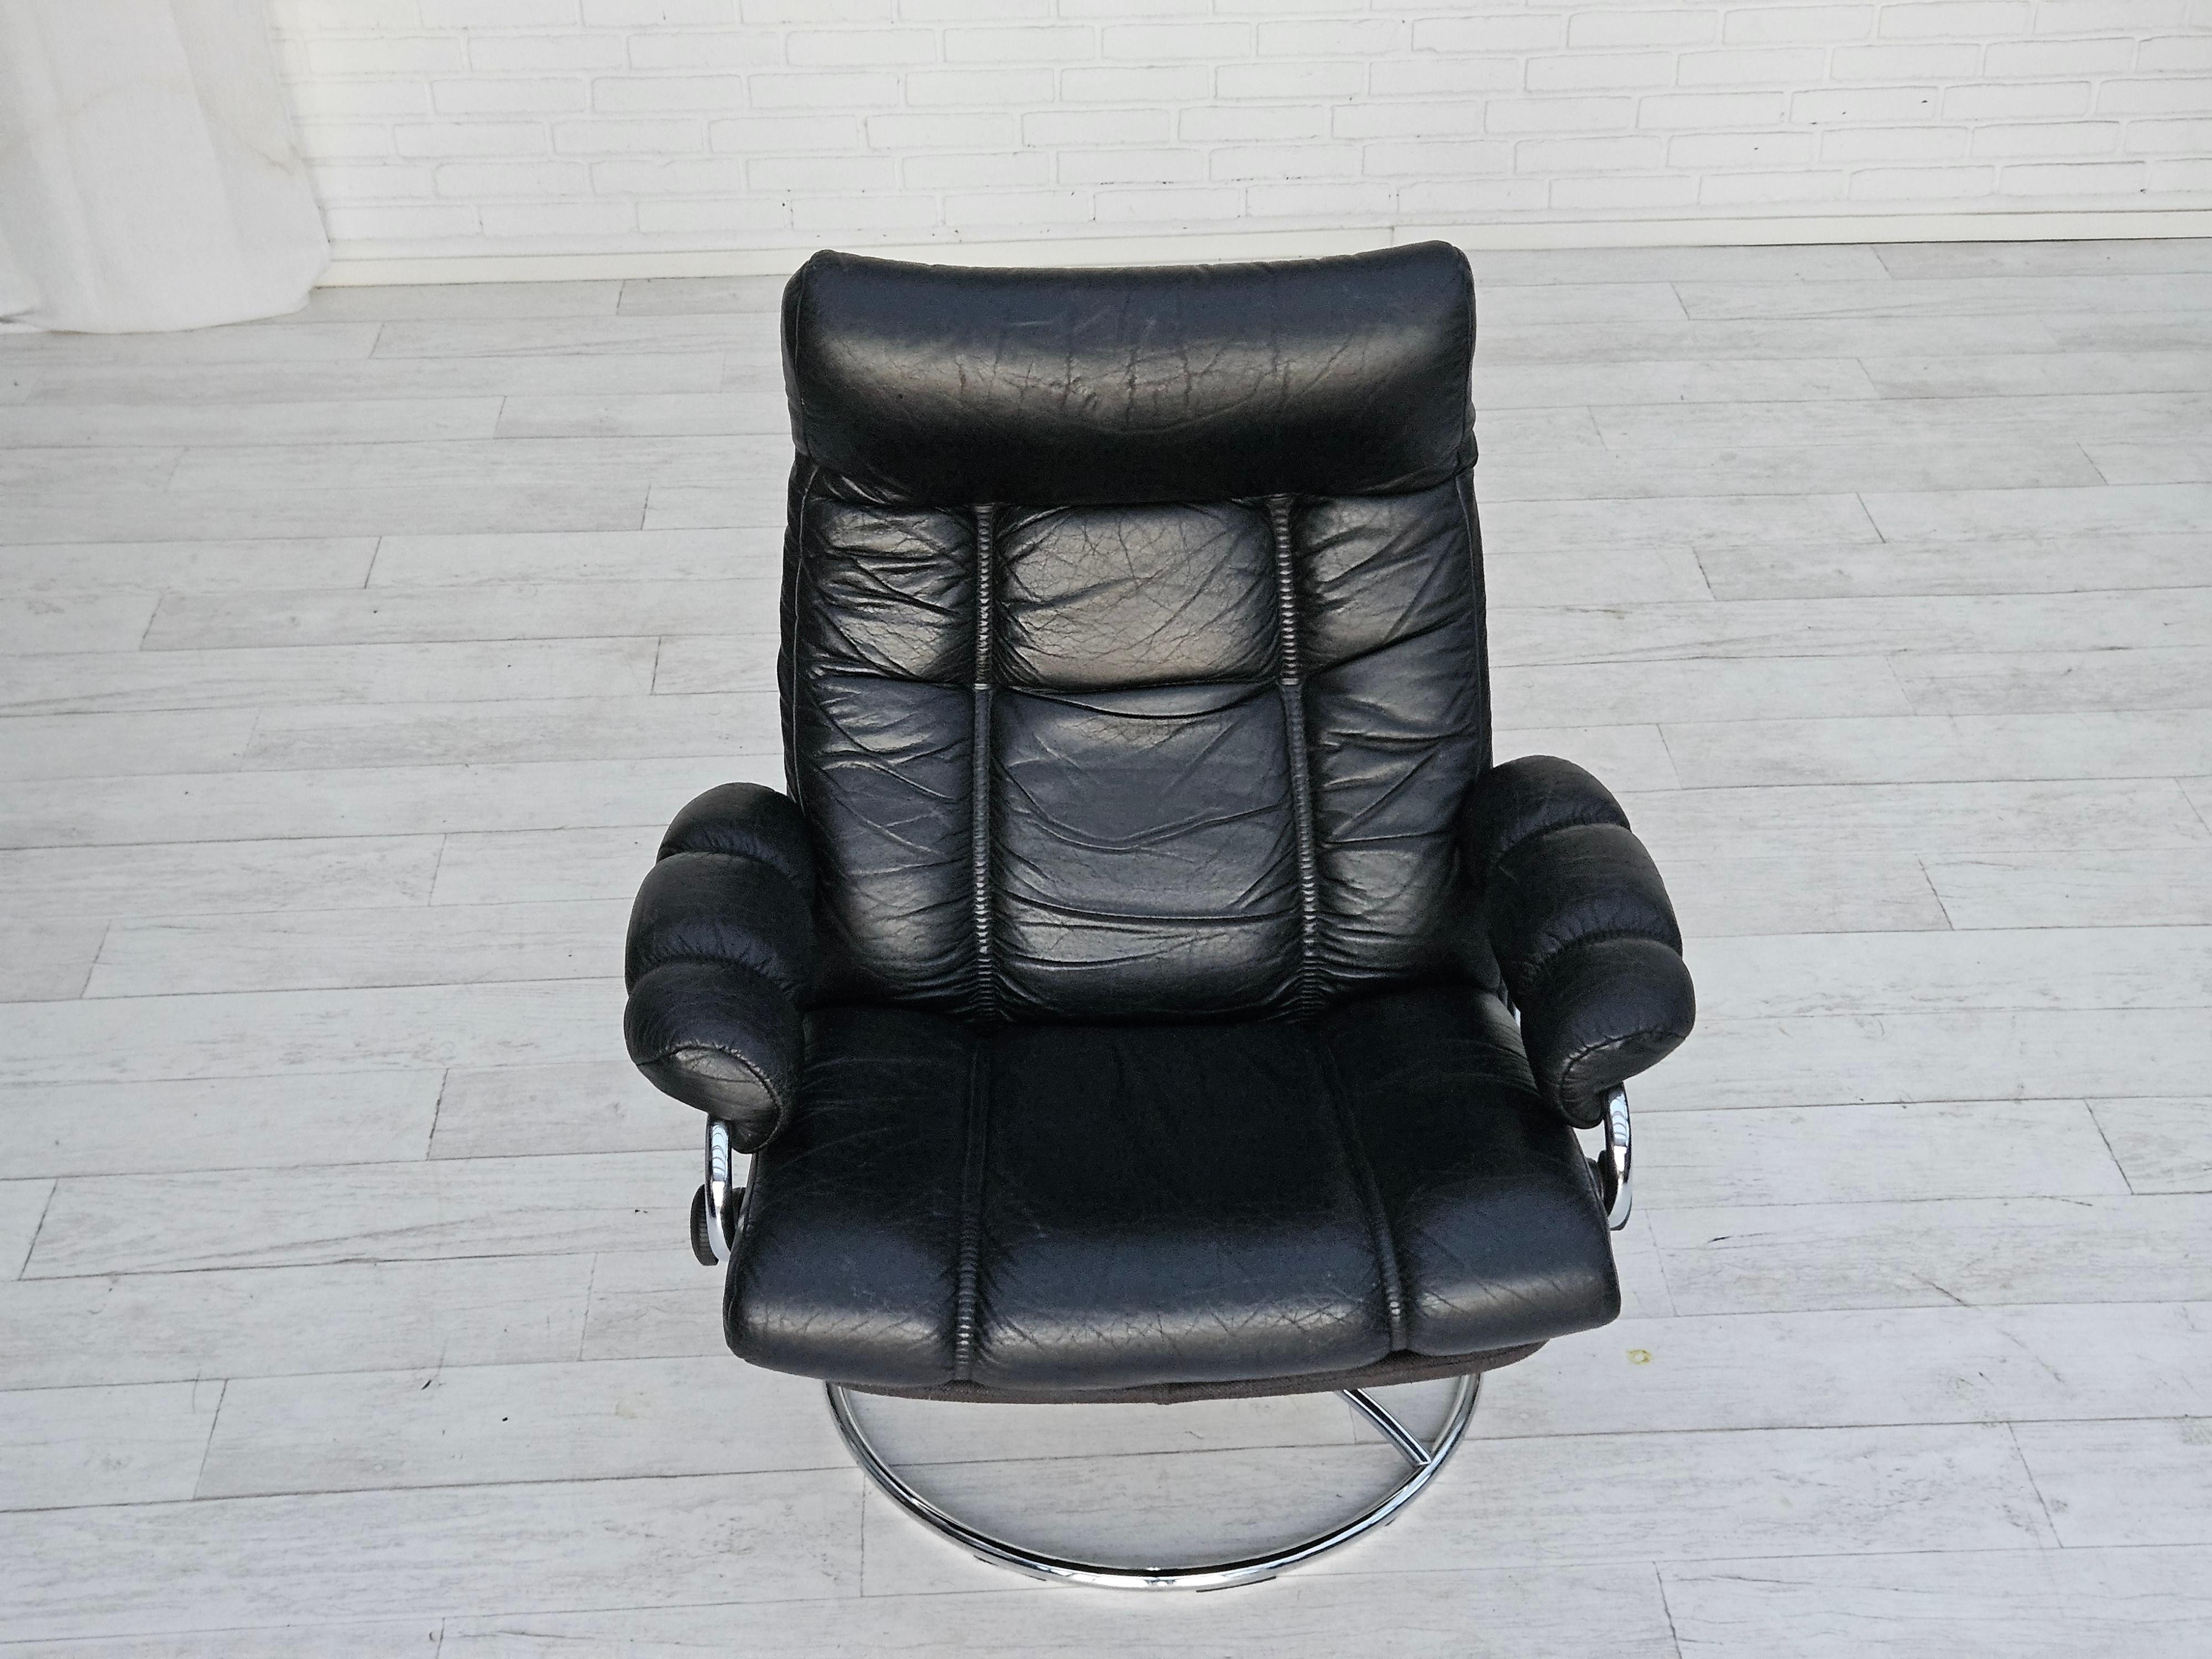 1970s, Norwegian relax swivel chair by Stressless, original very good condition. 5